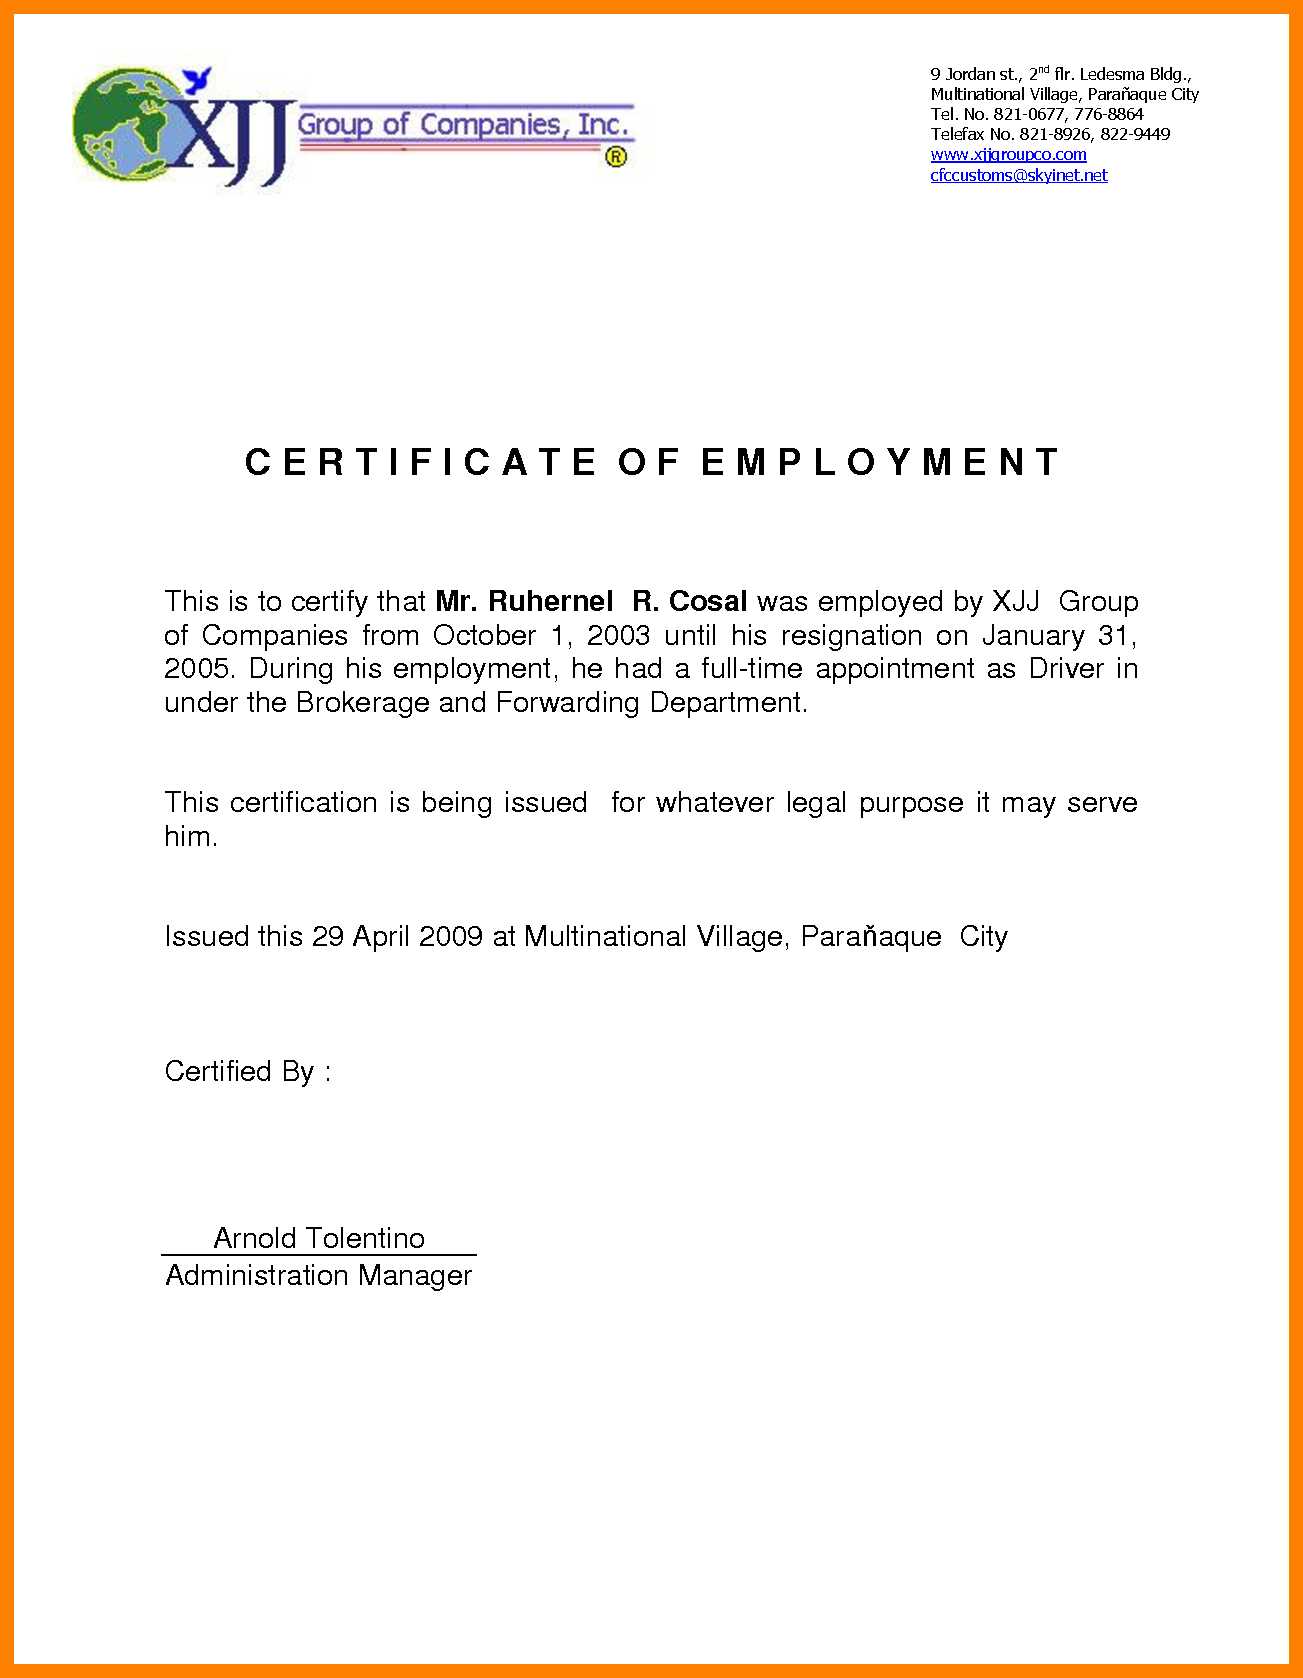 Certificate Of Employment Sample | Certificates Templates Free Throughout Template Of Certificate Of Employment